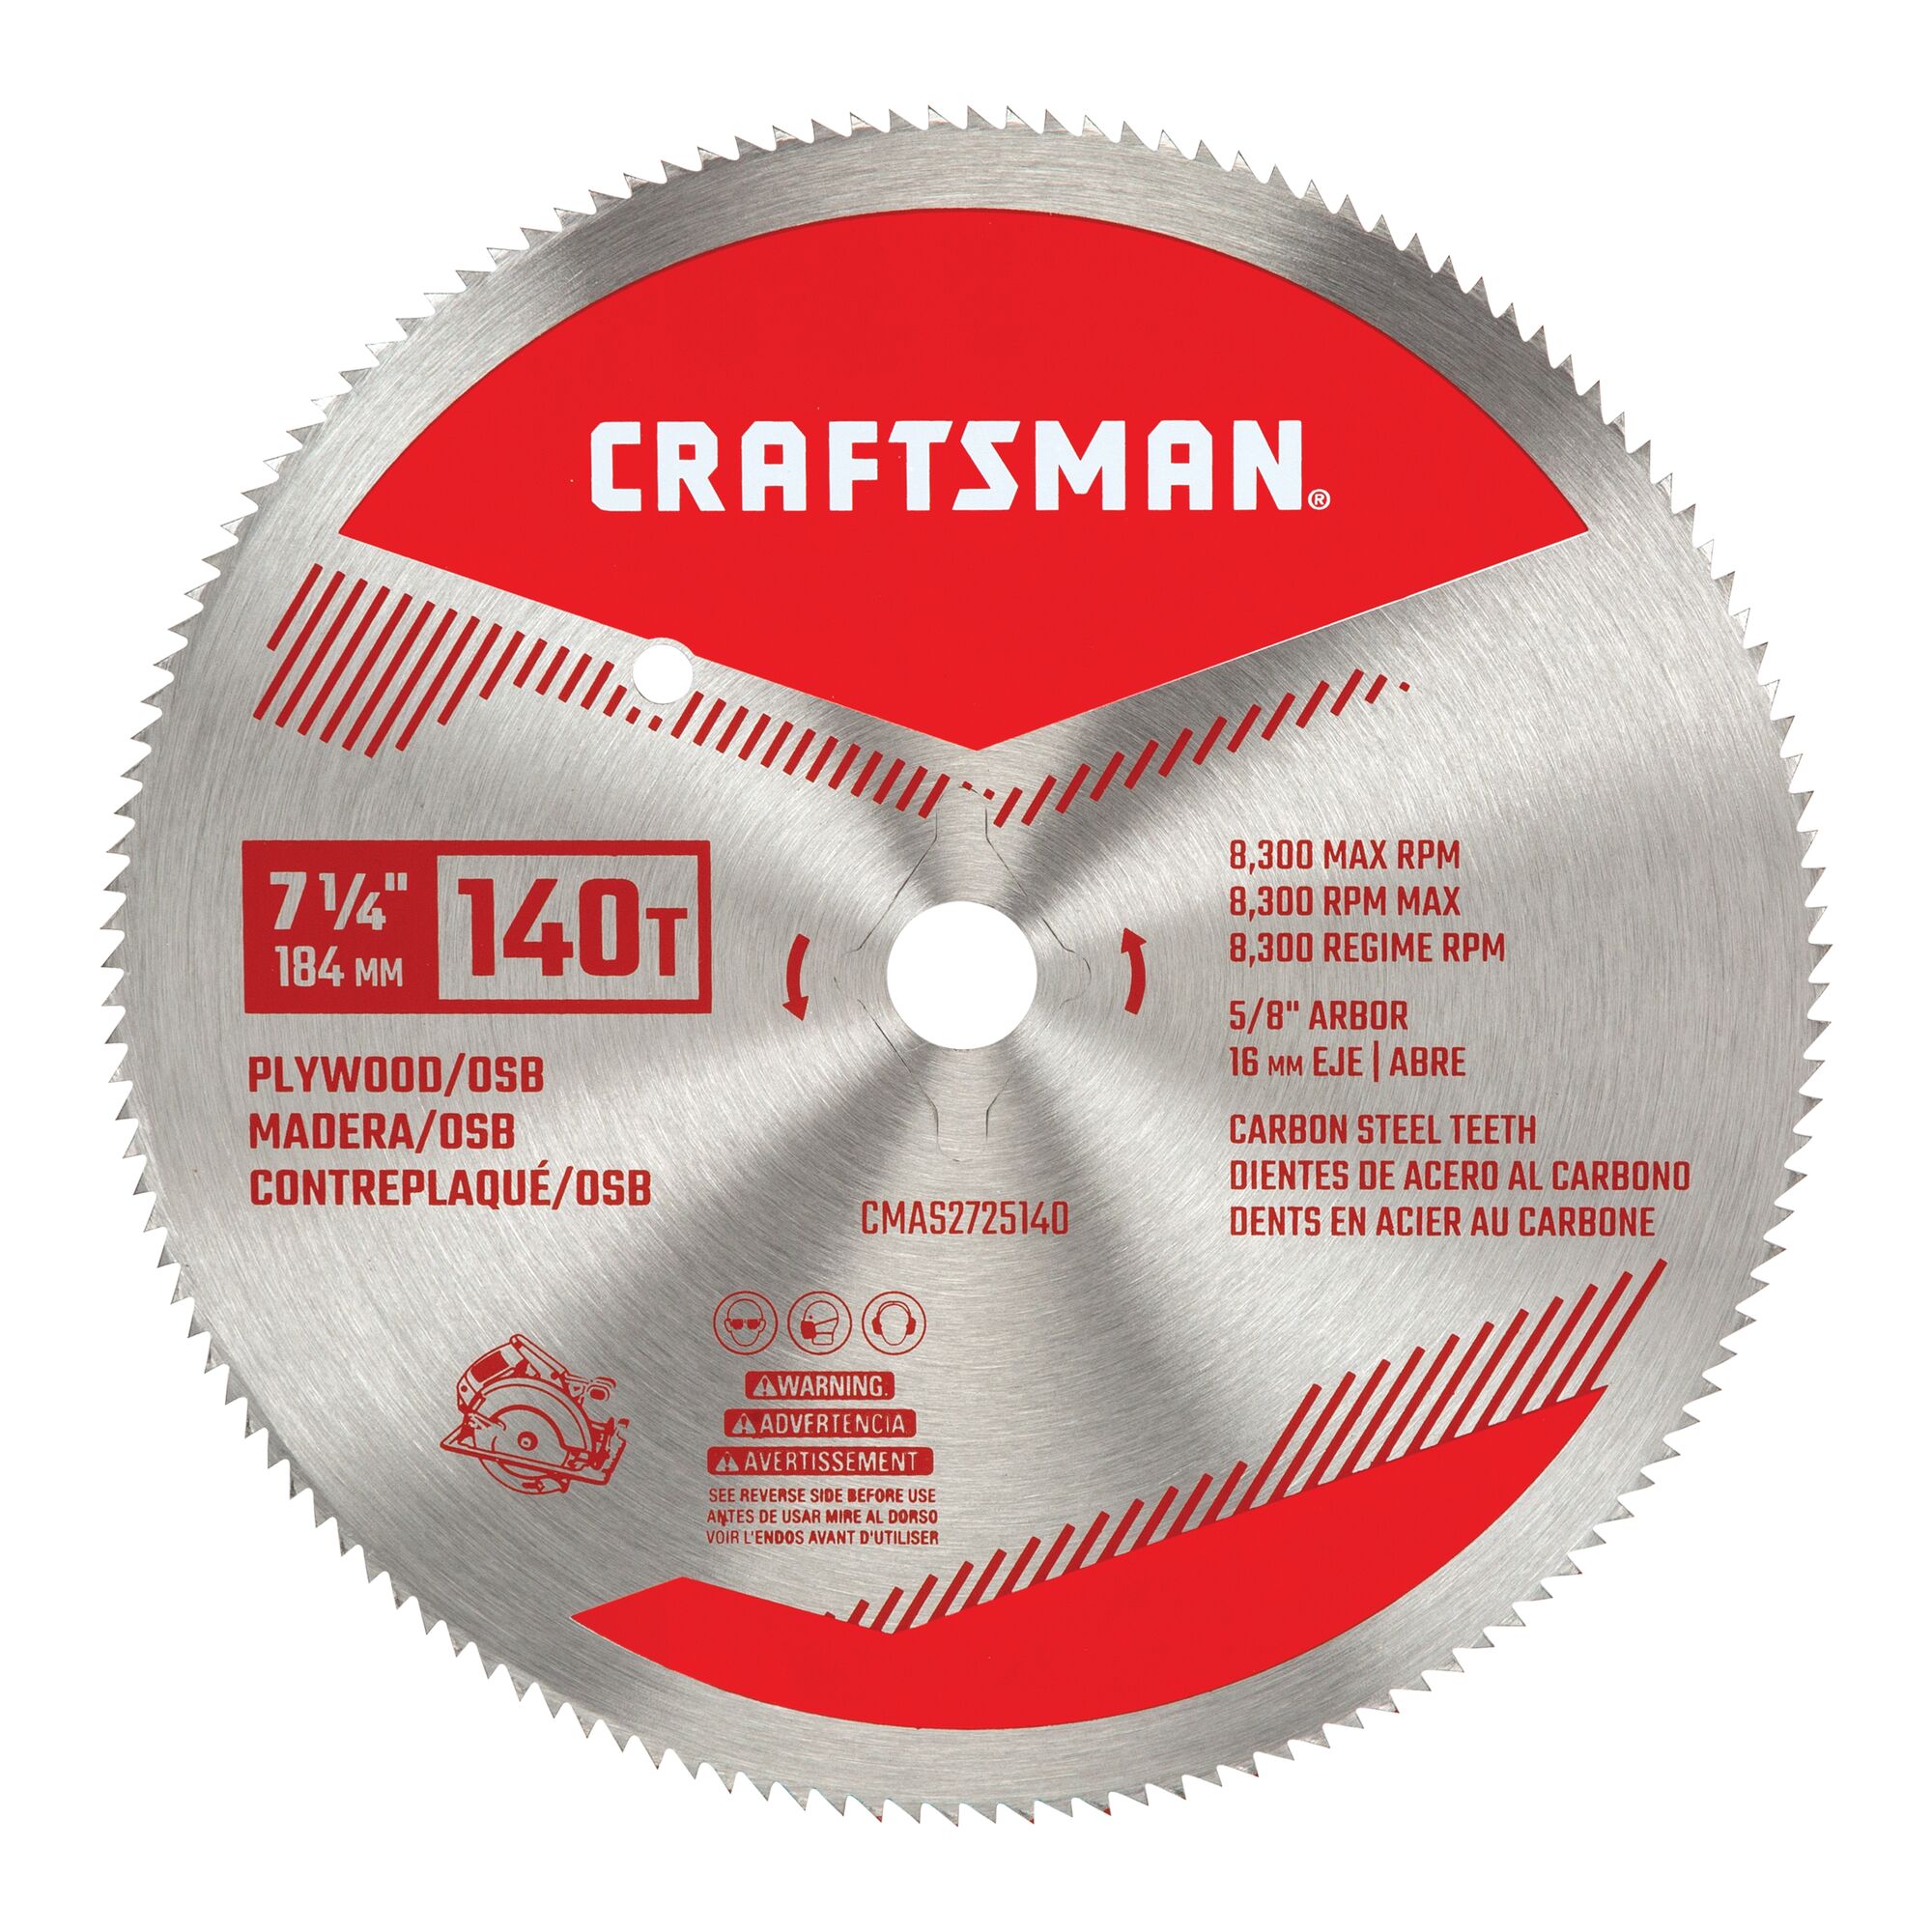 7 and a quarter inch 140 tooth plywood saw blade.